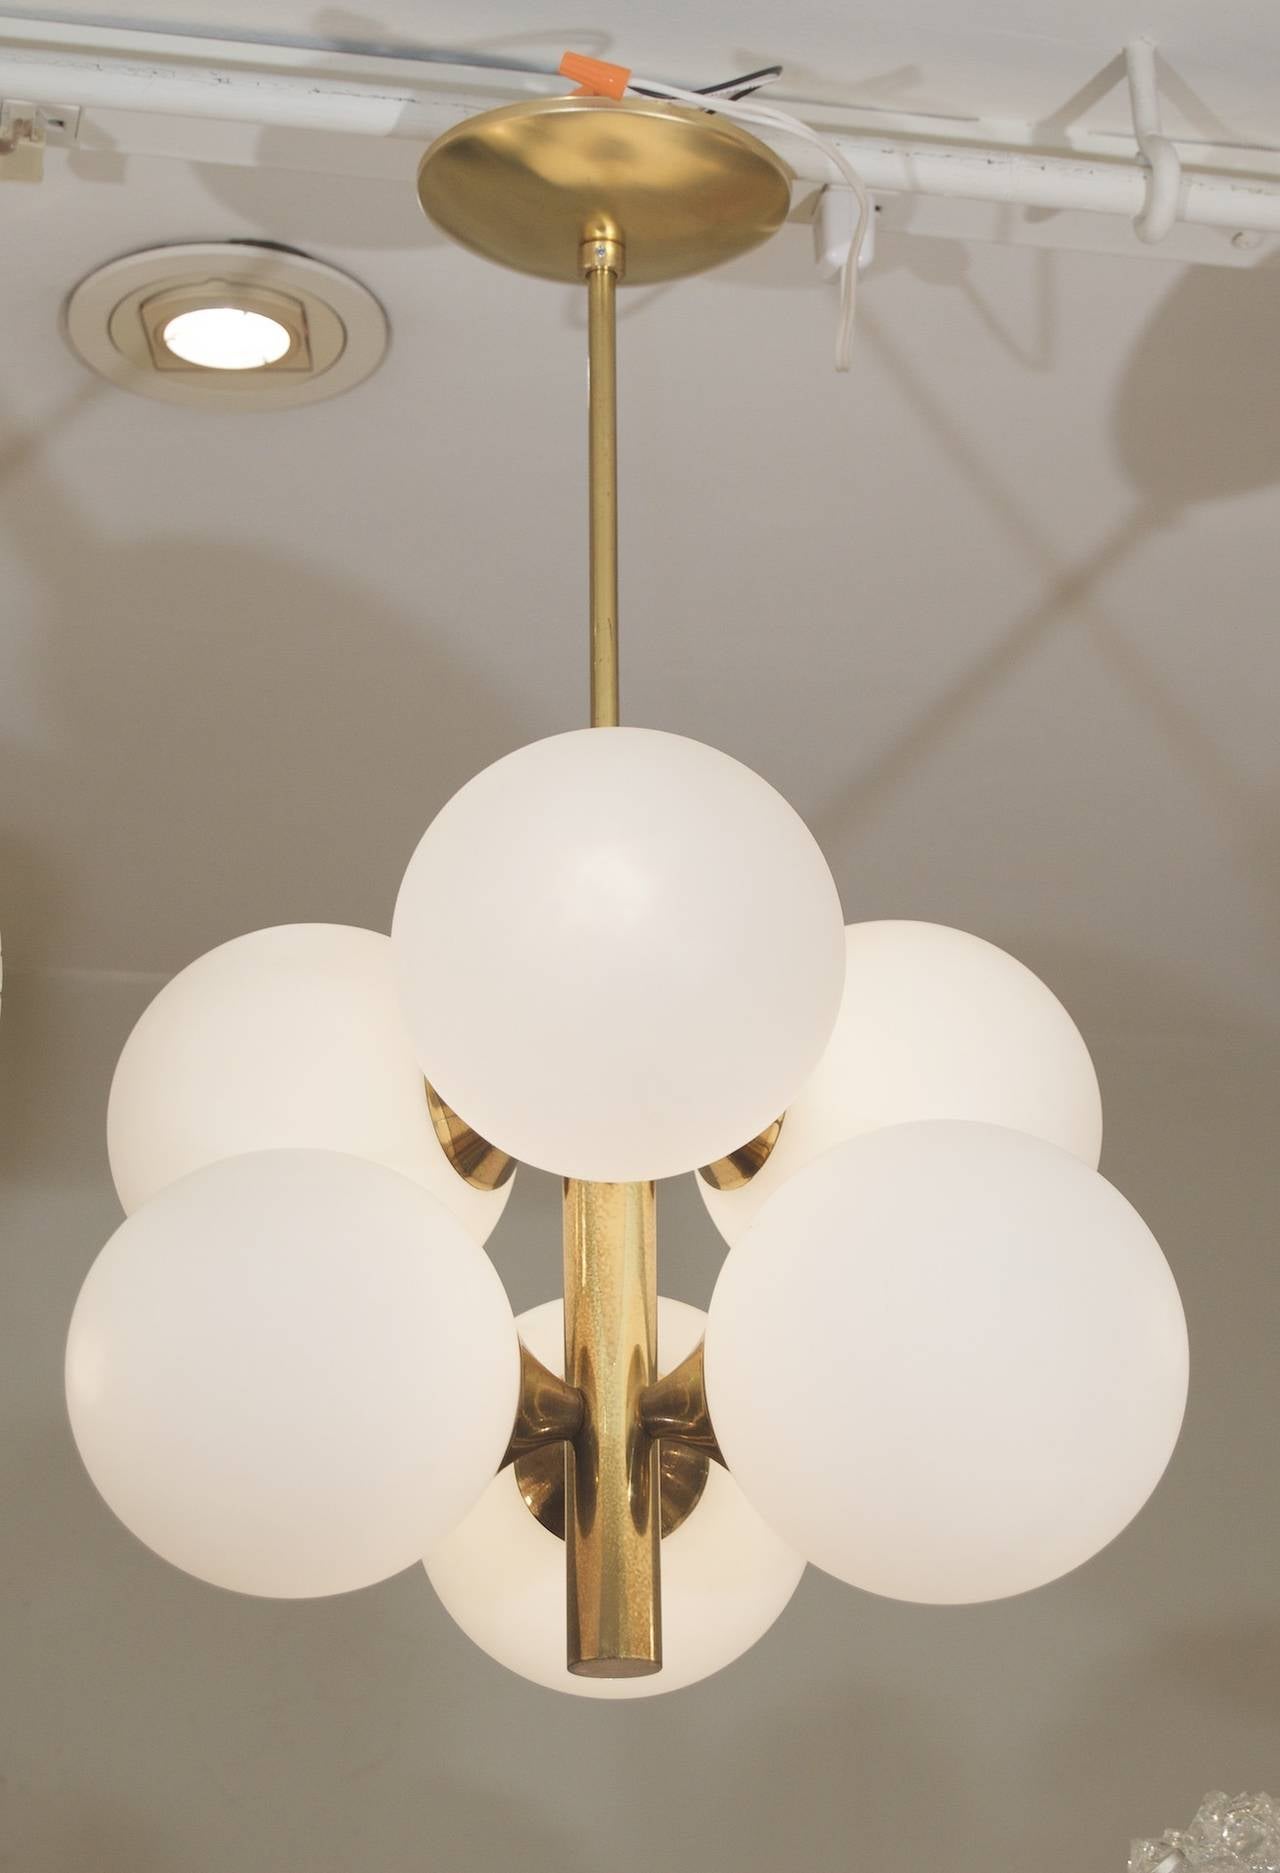 Fantastic mod light. Will update any space. Brass finish gives a warm feel.

Each globe takes a single E-14 base bulb up to 40 watts, new wiring. Pictured lit with 10 watt bulbs. New wiring.

Height is of chandelier body only; rod can be